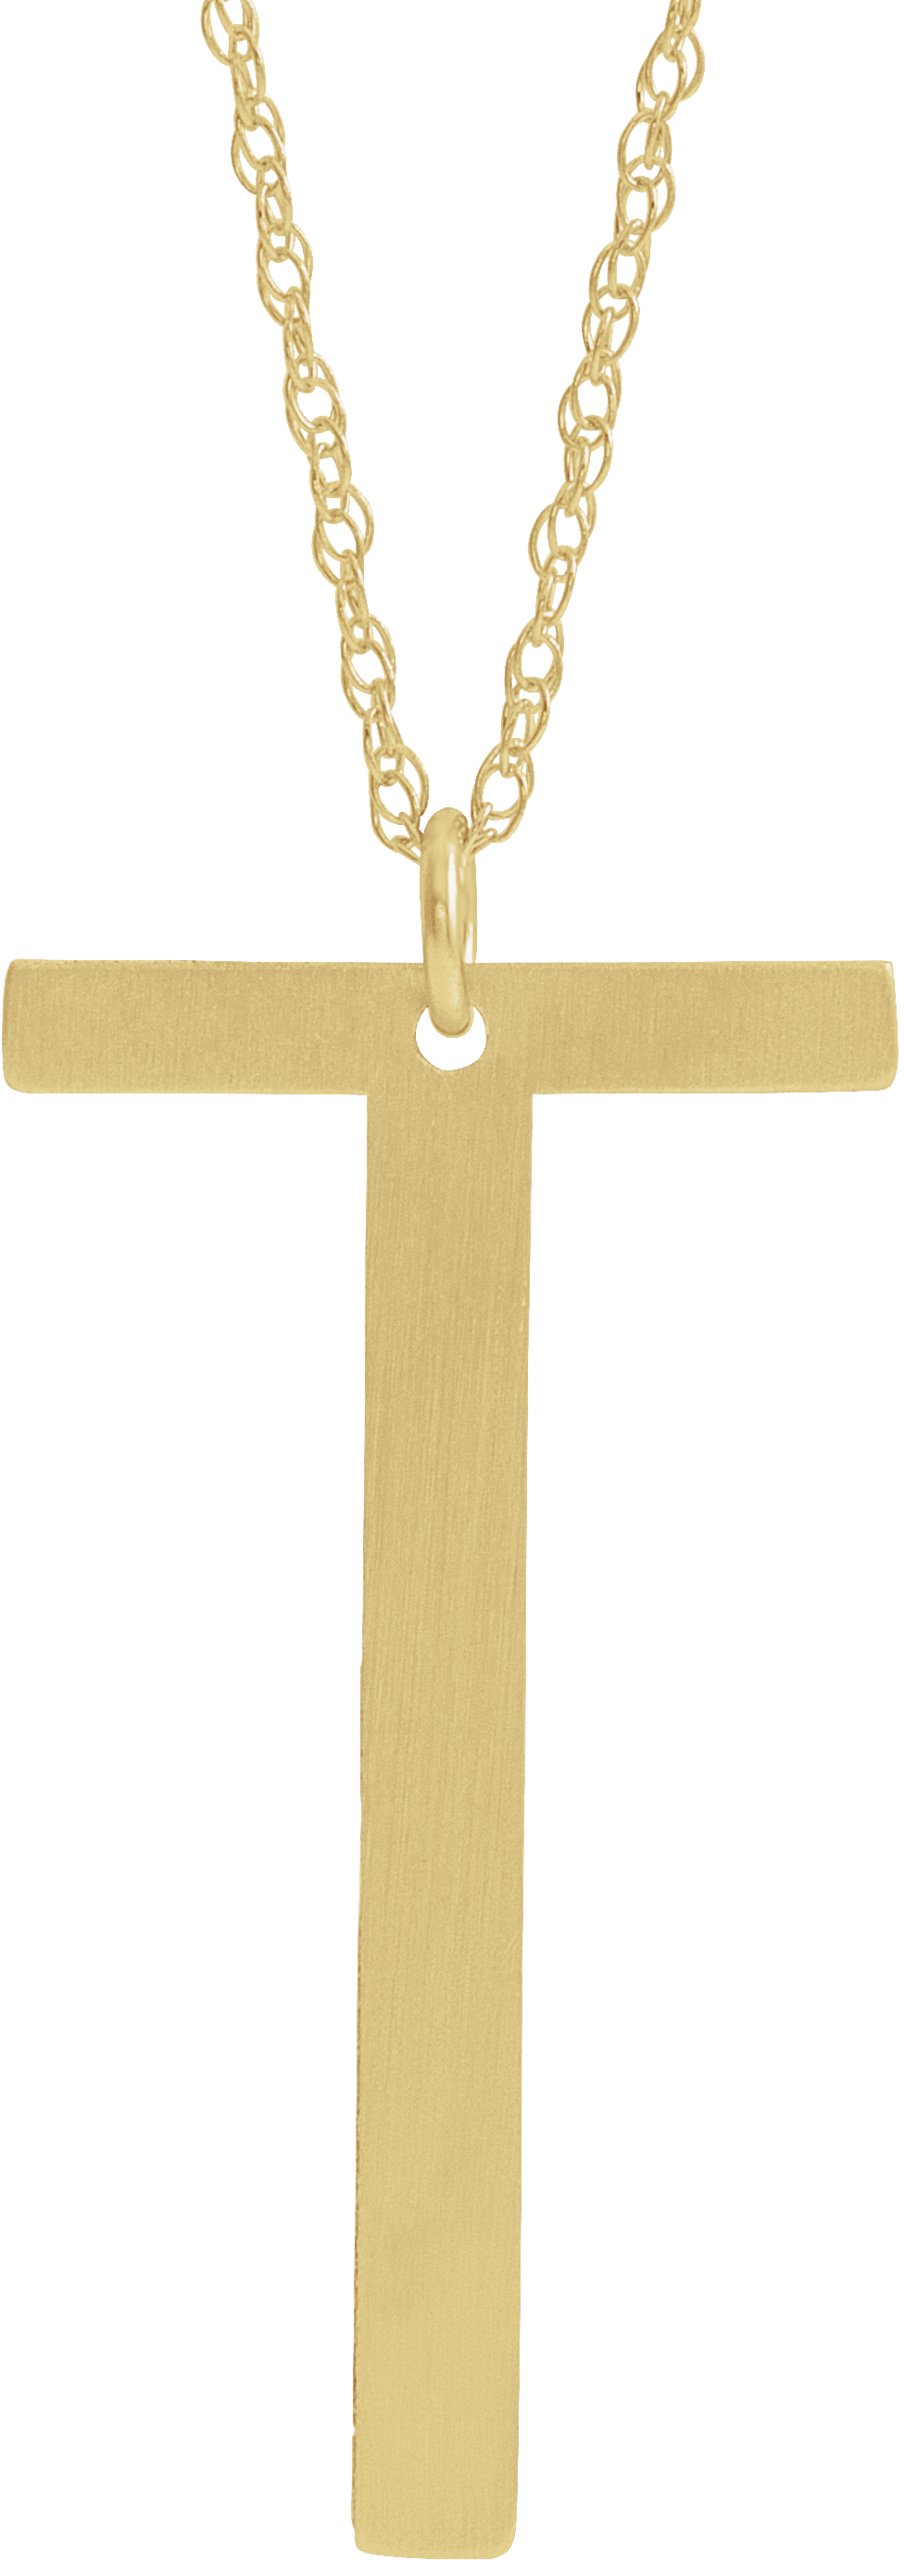 14K Yellow Gold-Plated Sterling Silver Block Initial T 16-18" Necklace with Brush Finish